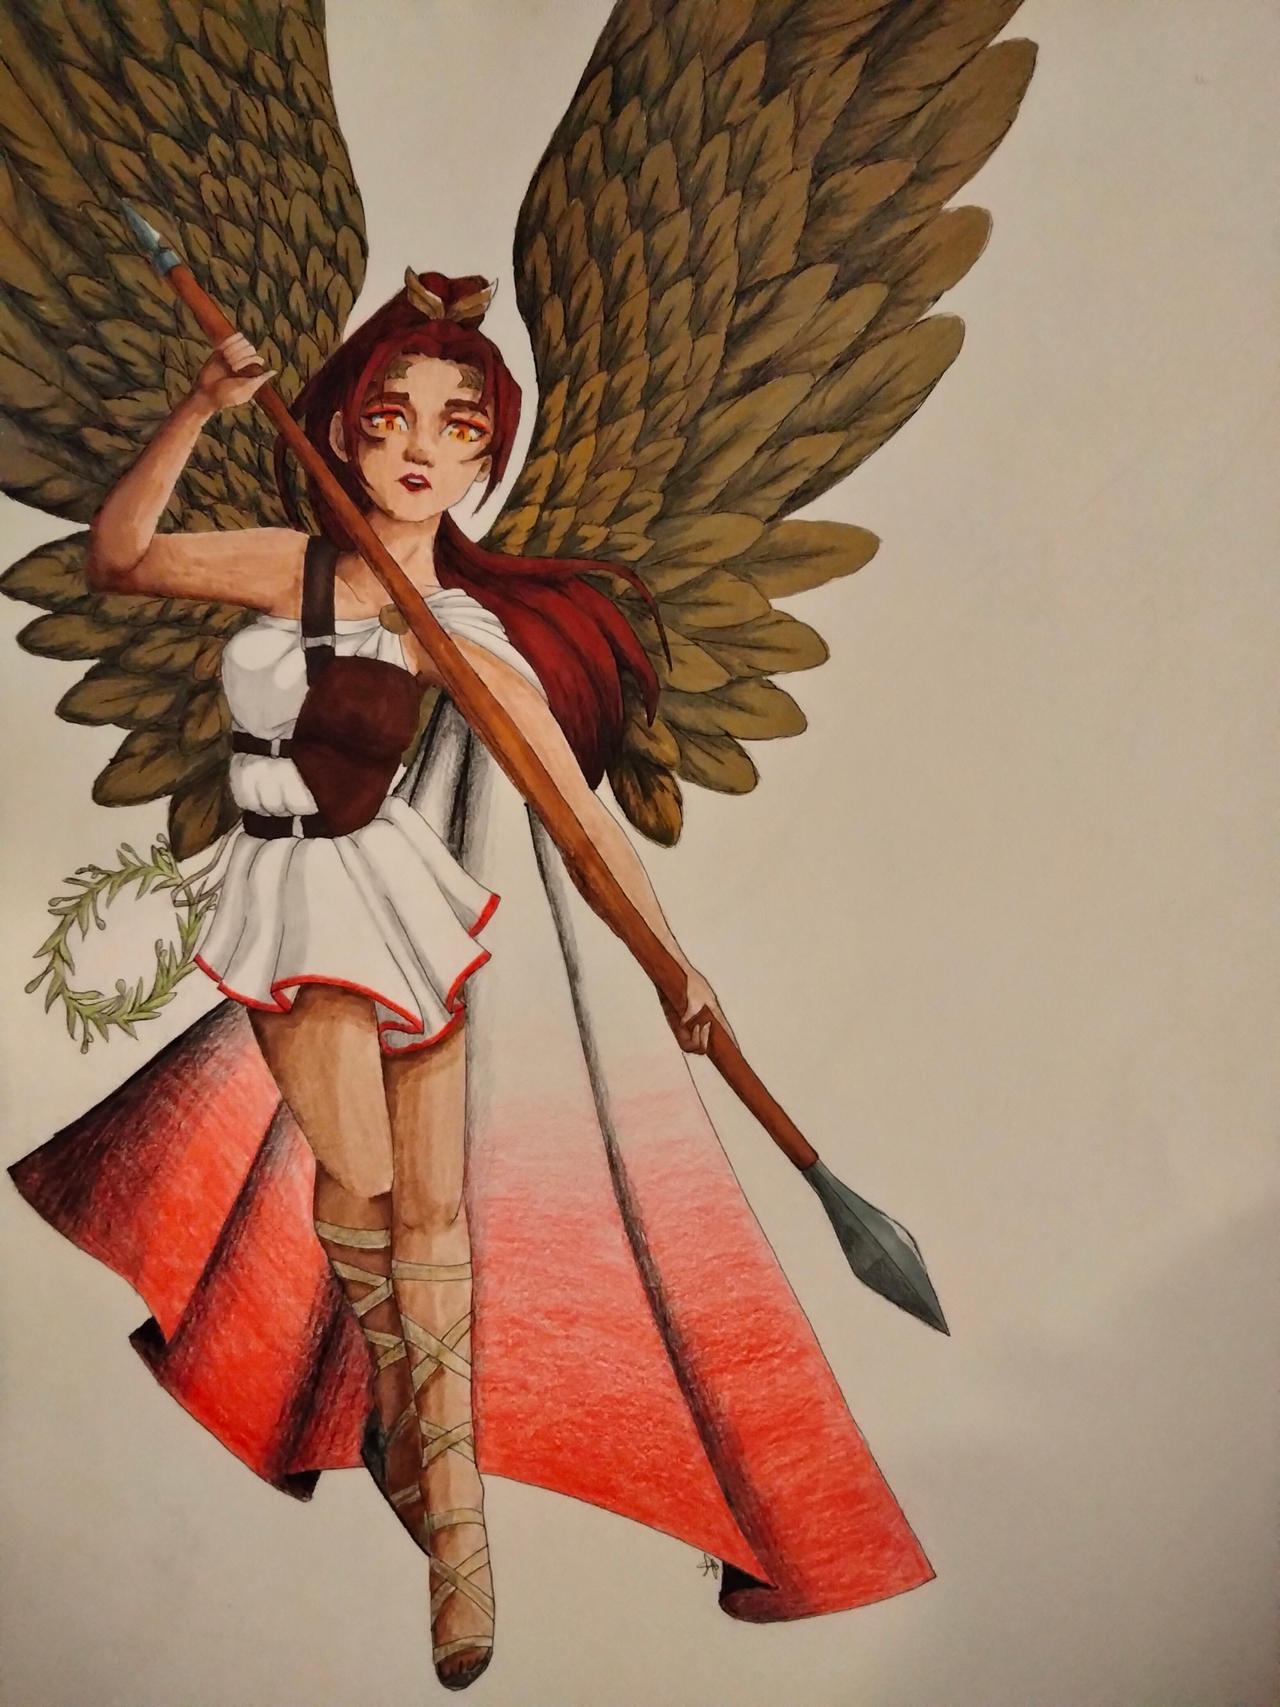 Nike, Goddess of Victory by LilCrimsonWitch on DeviantArt